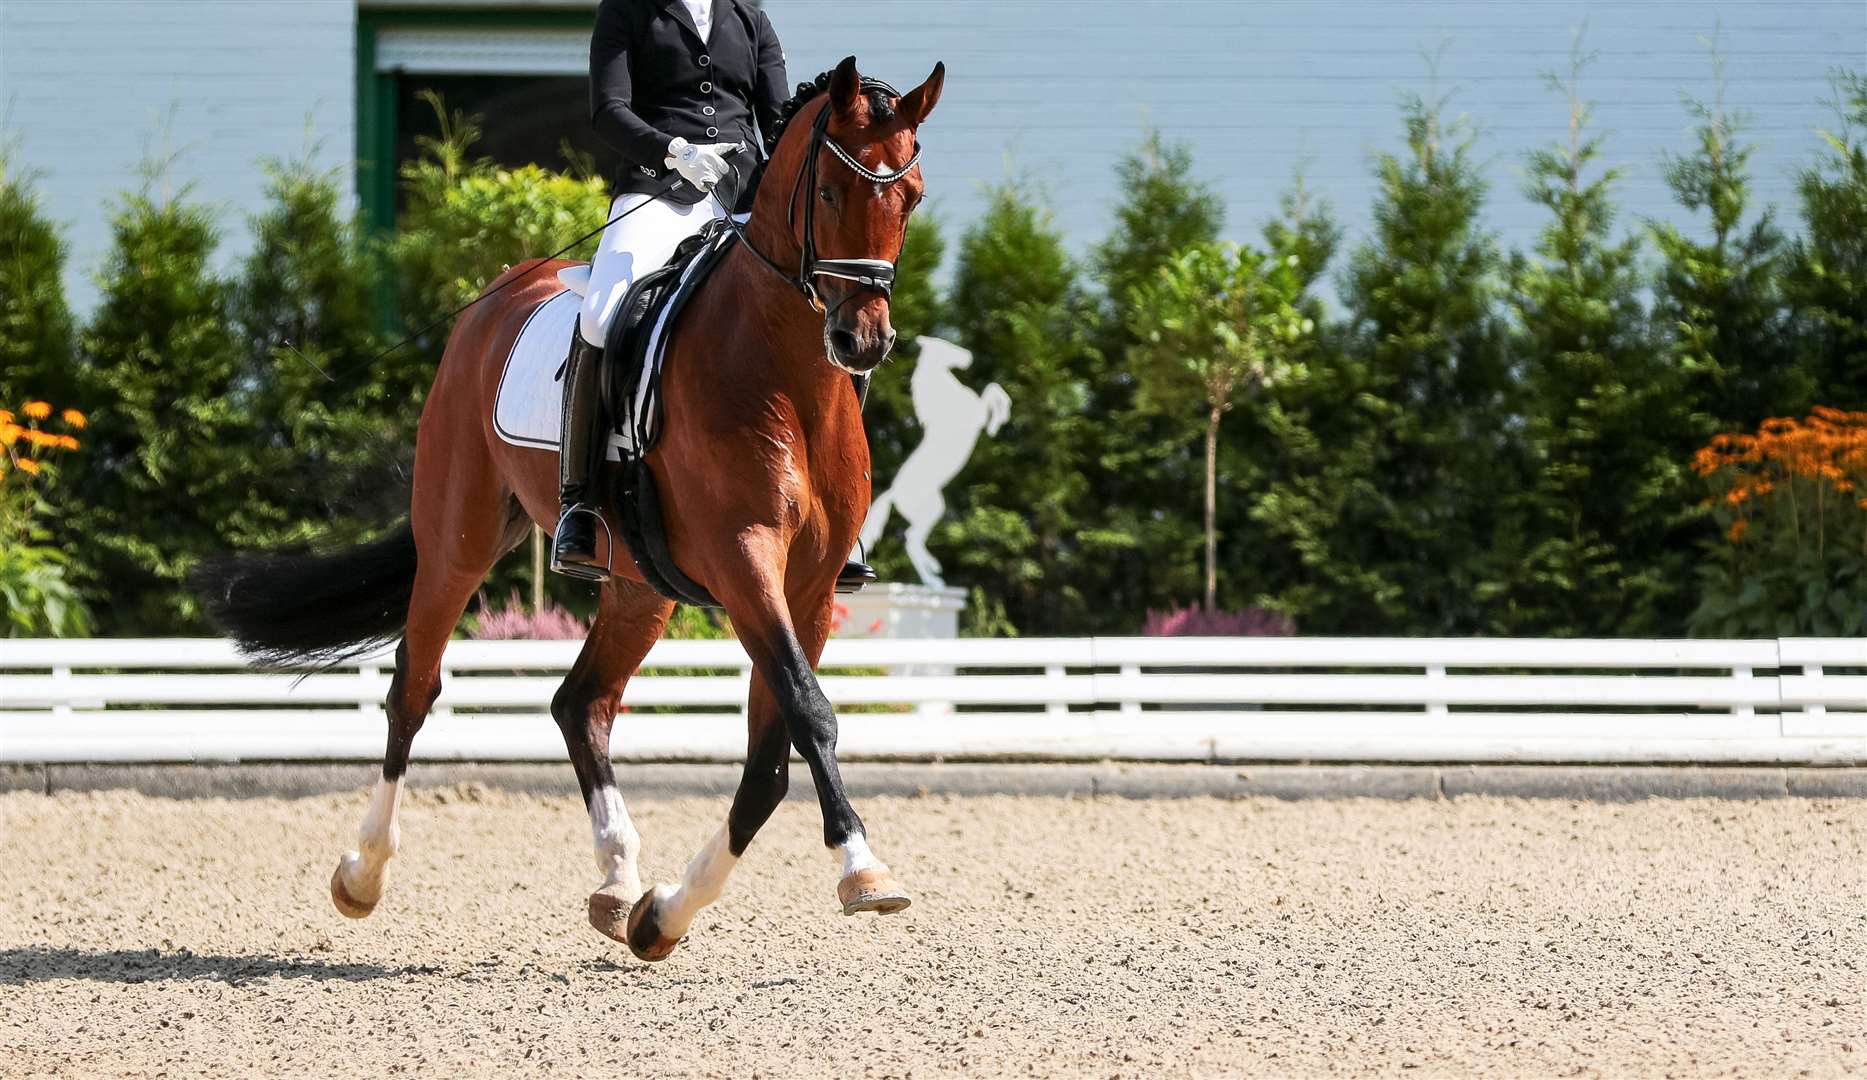 A dressage horse is put through its paces.